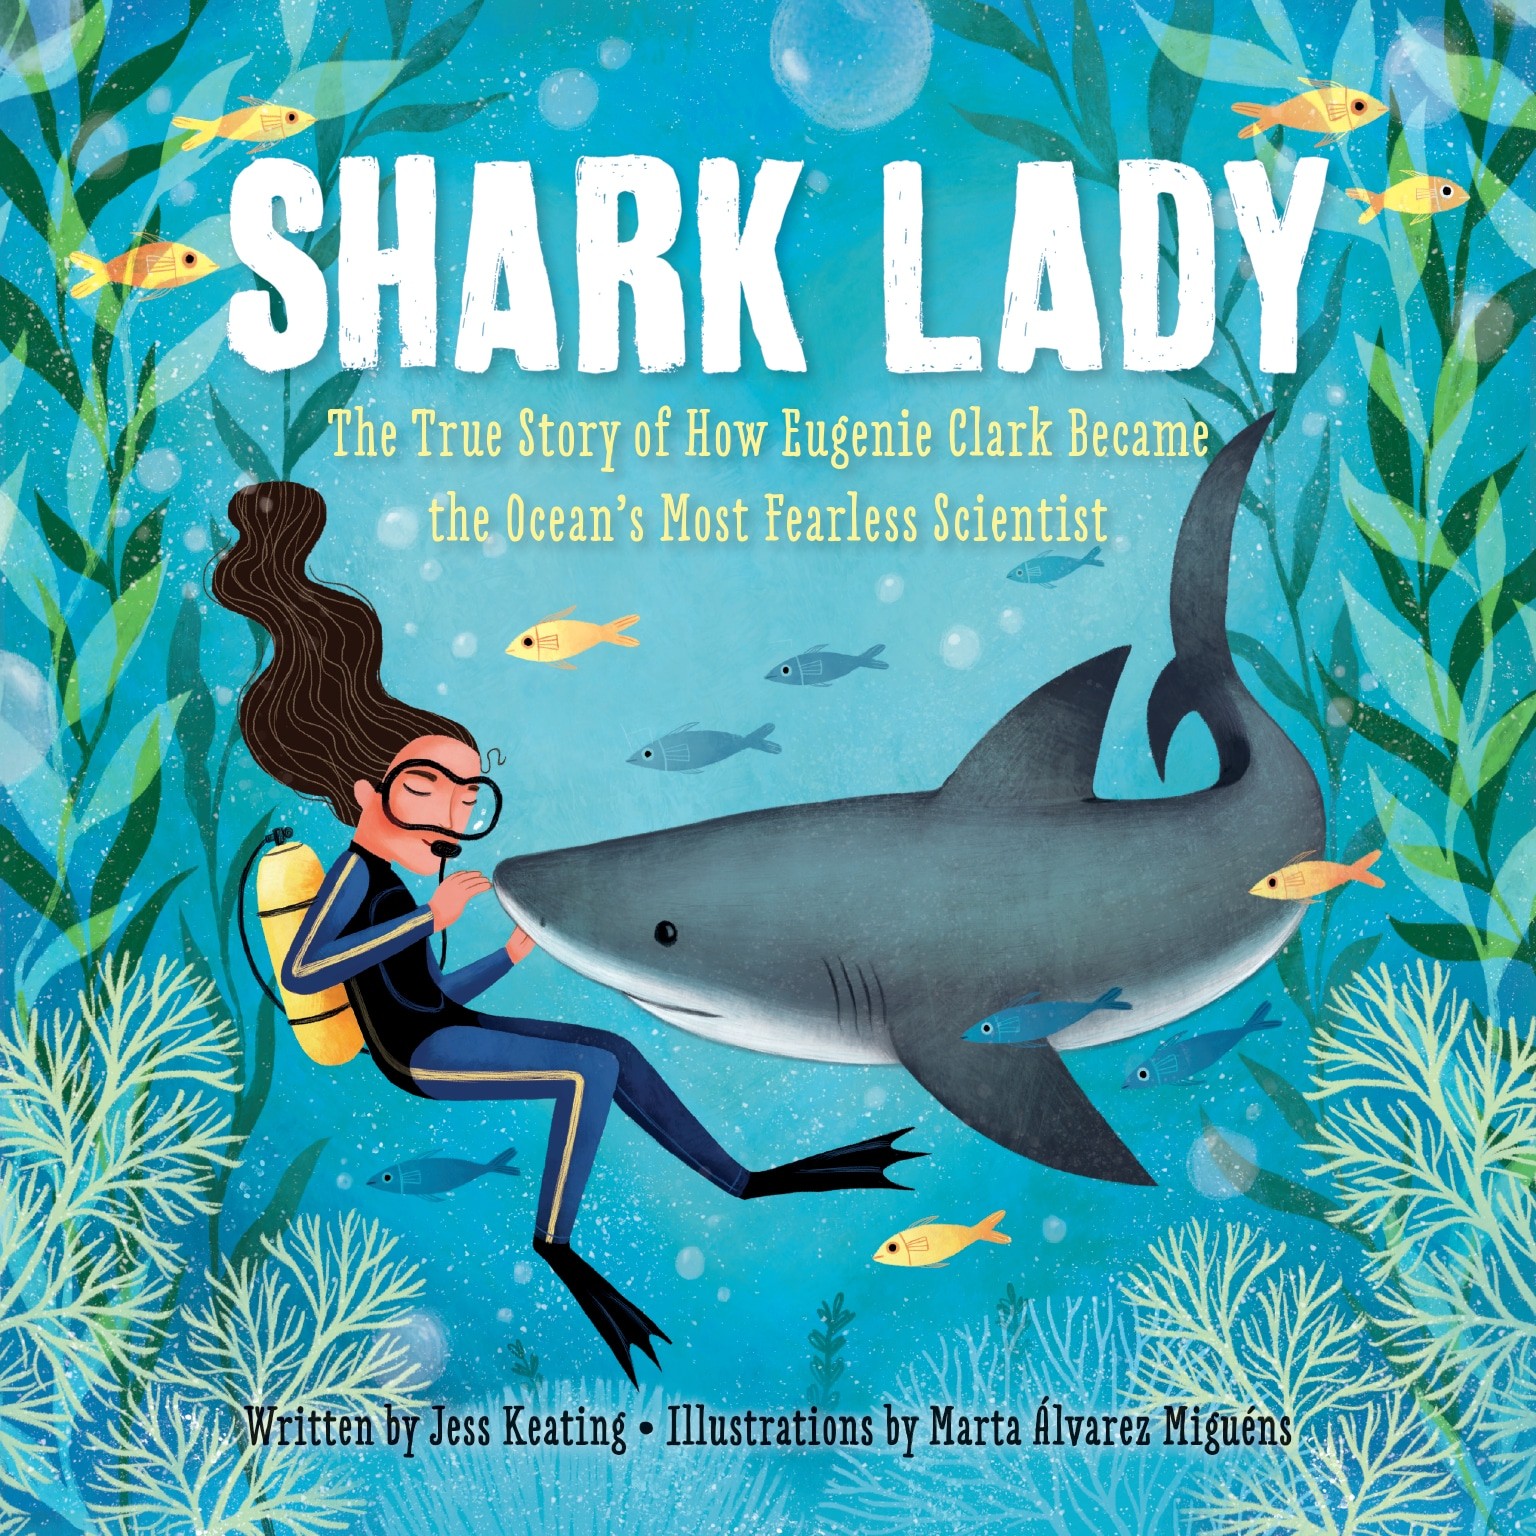 "Shark Lady: The True Story of How Eugenie Clark Became the Ocean's Most Fearless Scientist"